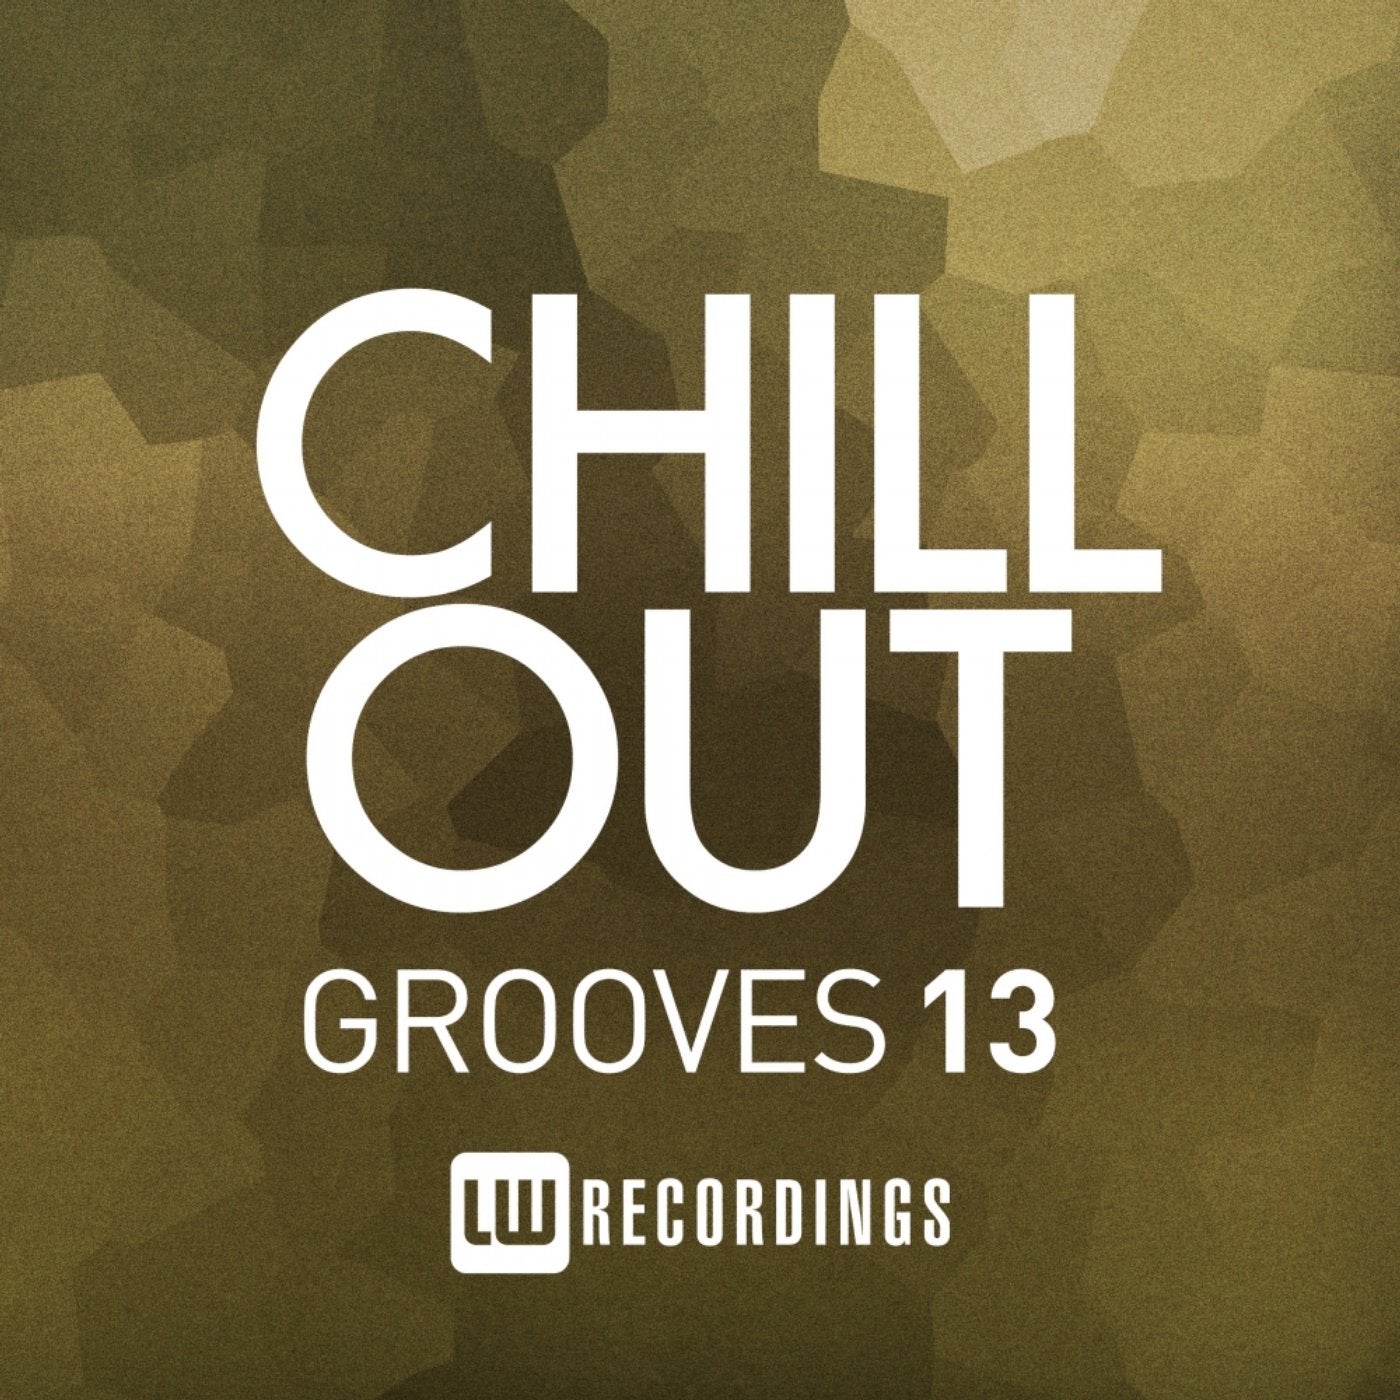 Chill Out Grooves, Vol. 13